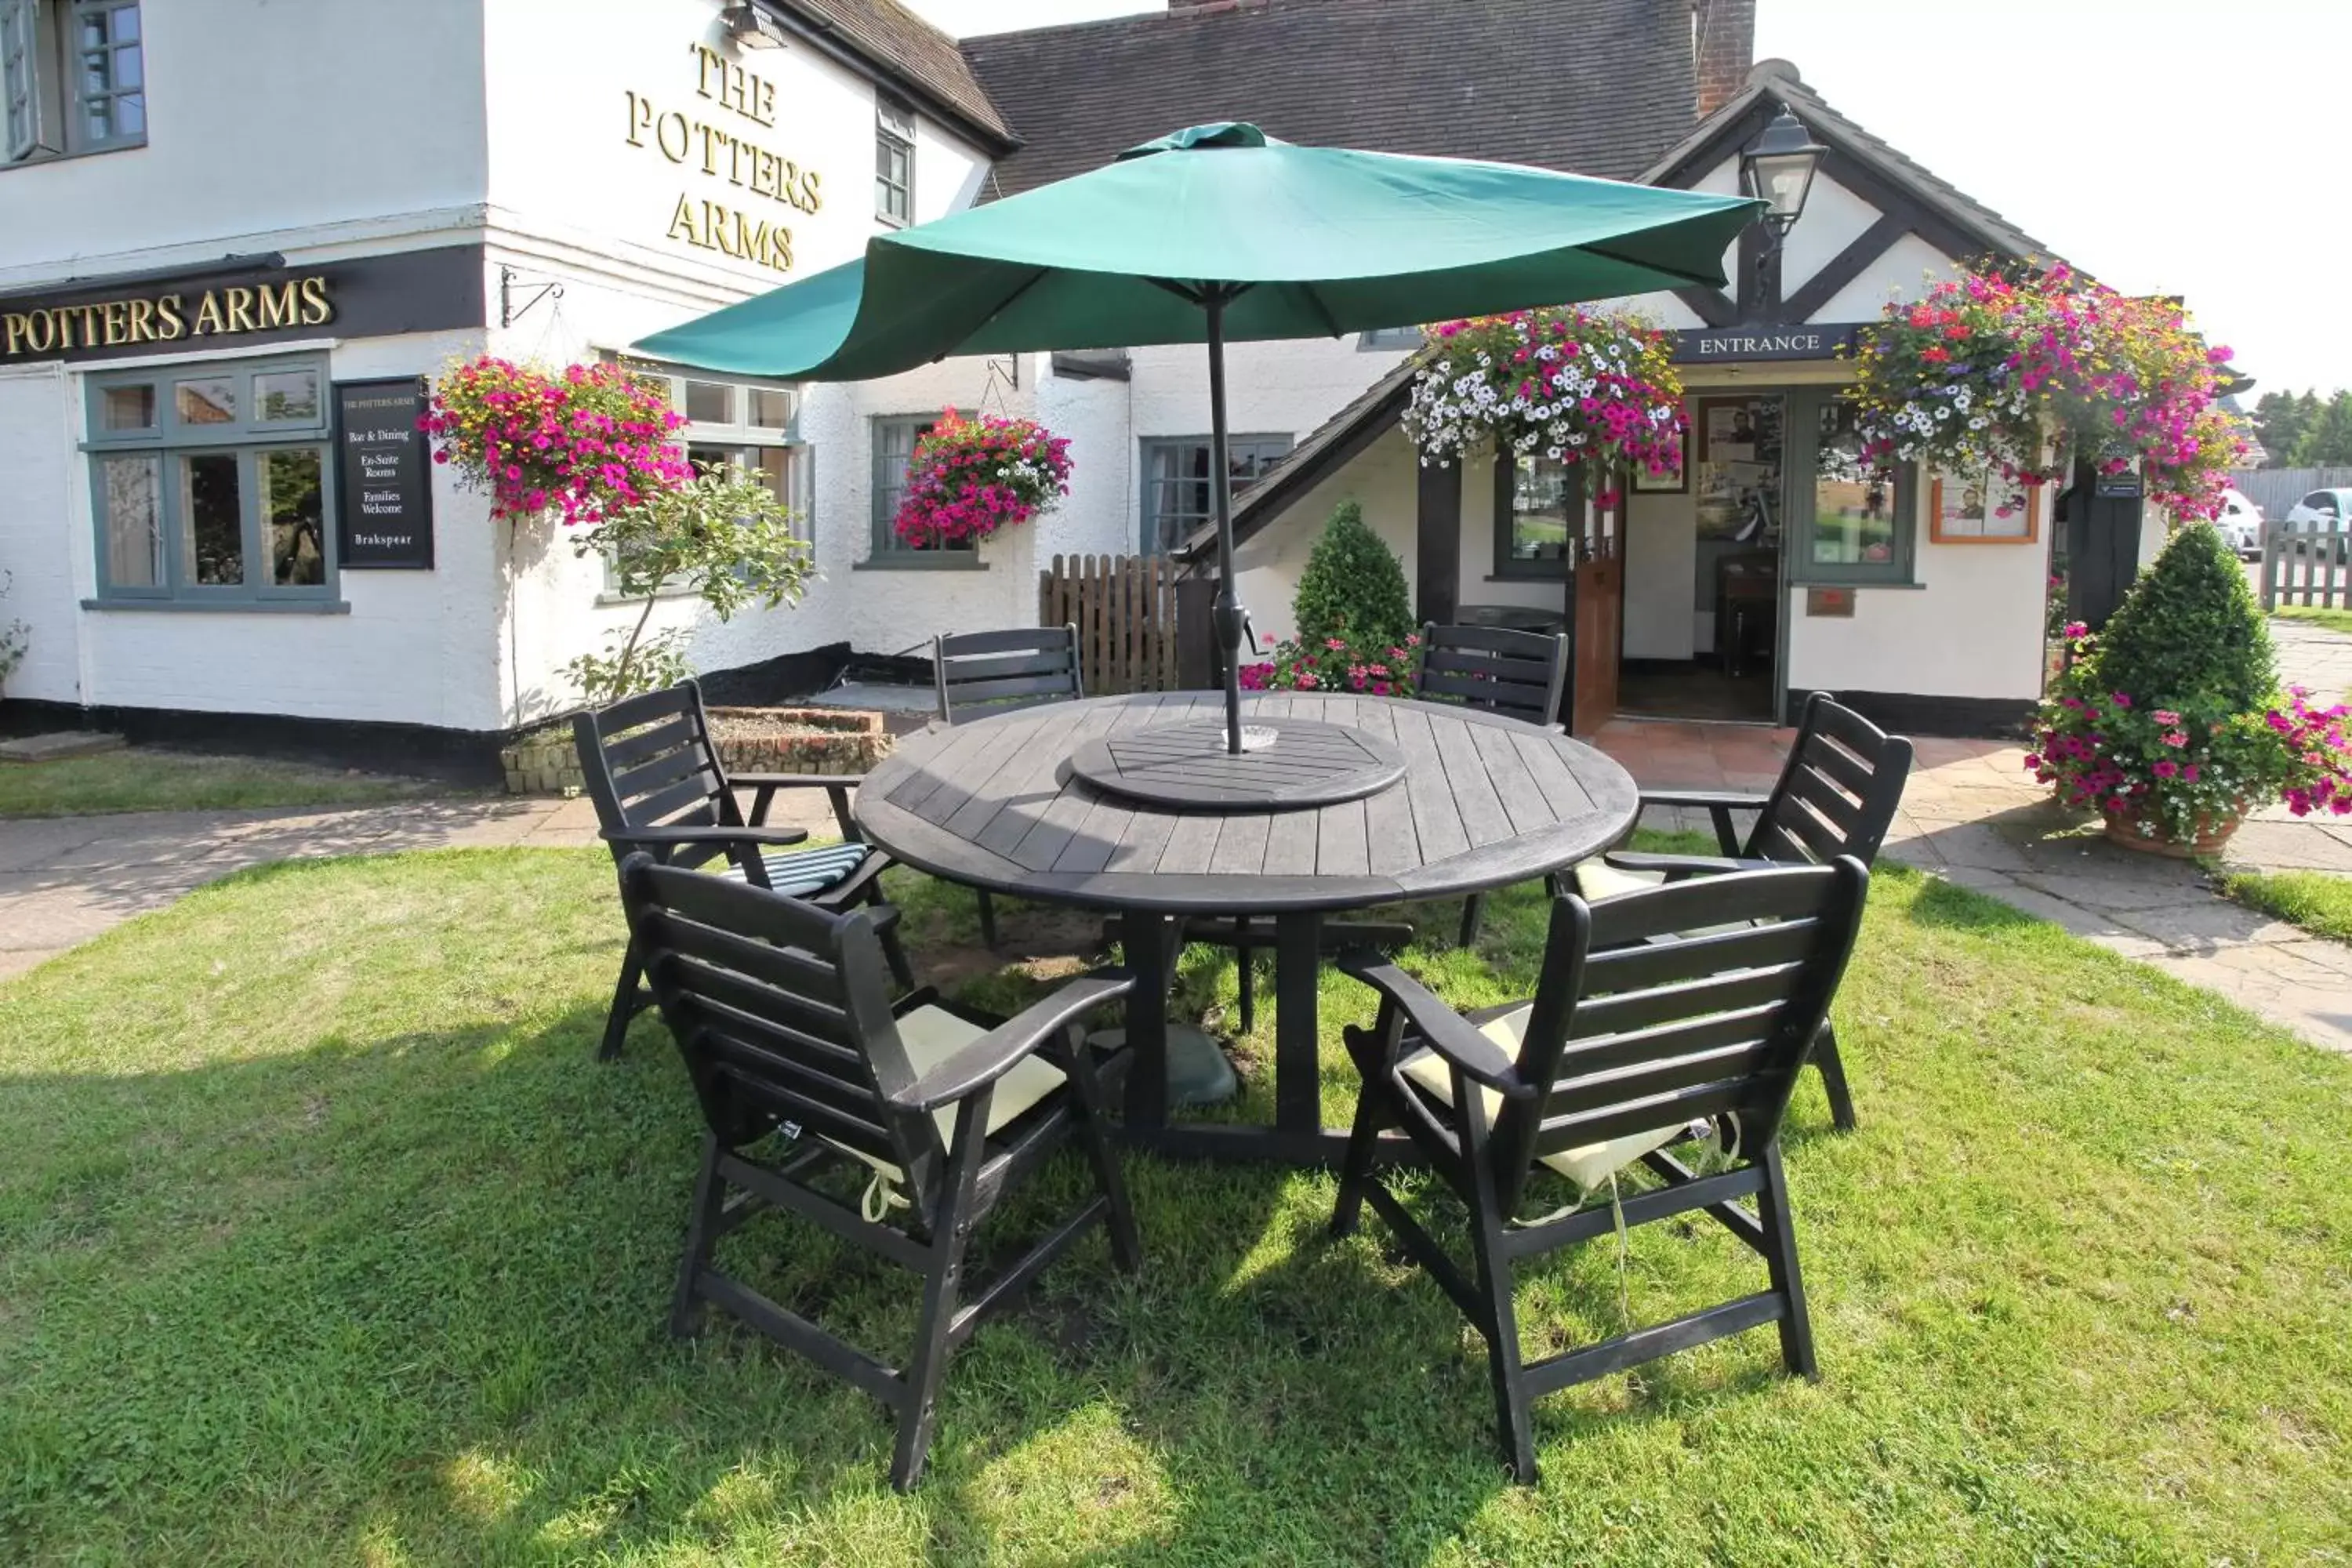 Garden, Patio/Outdoor Area in The Potters Arms